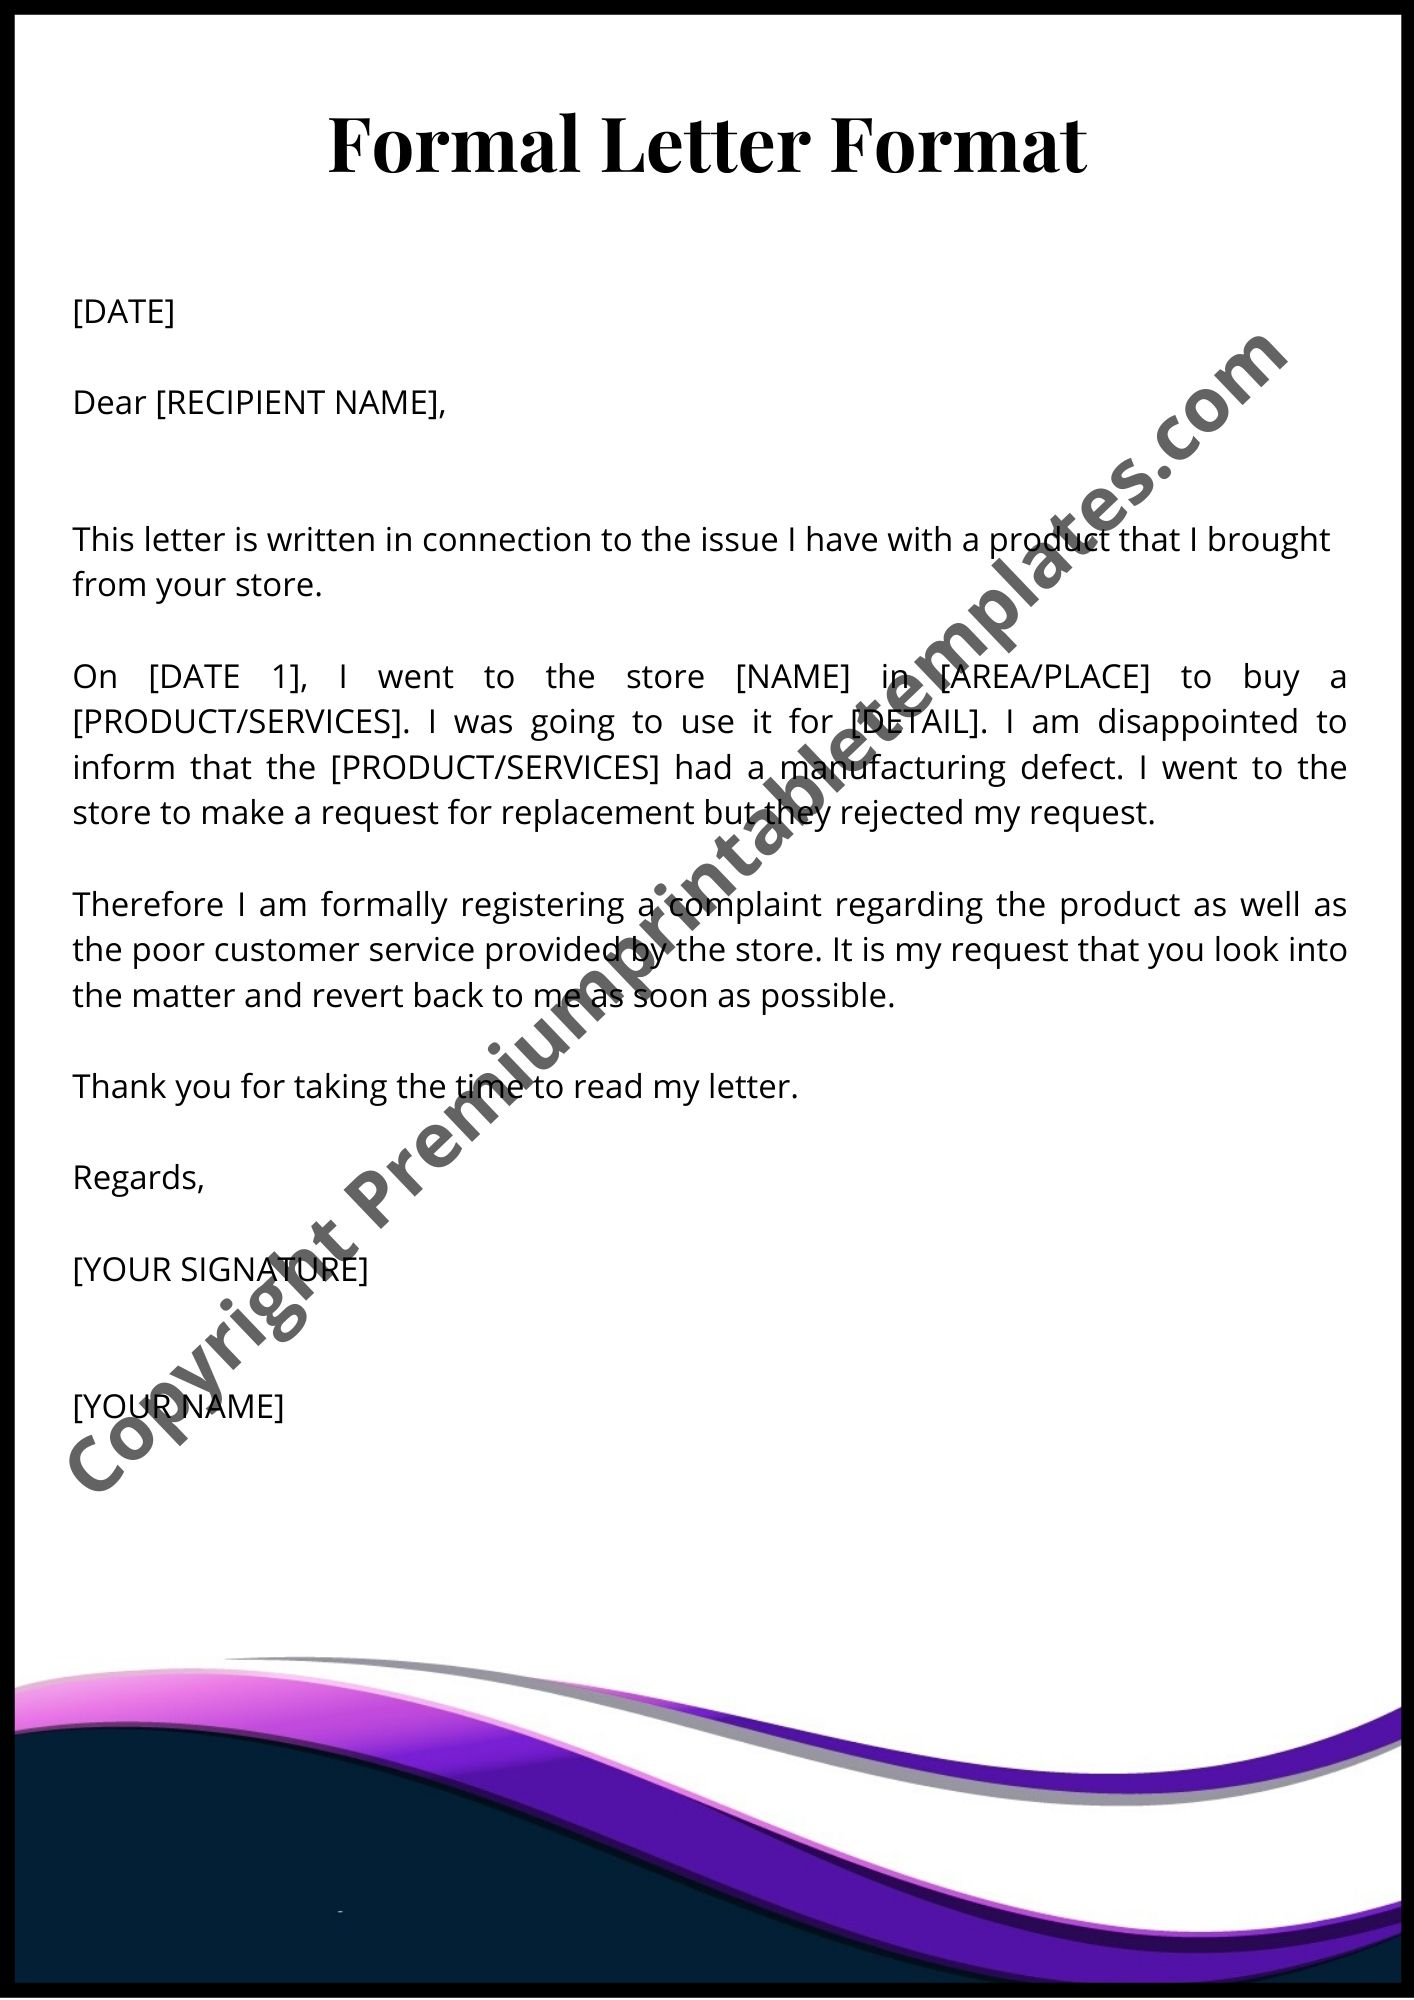 What Is The Format Of Formal Letter Collection Letter Template Collection